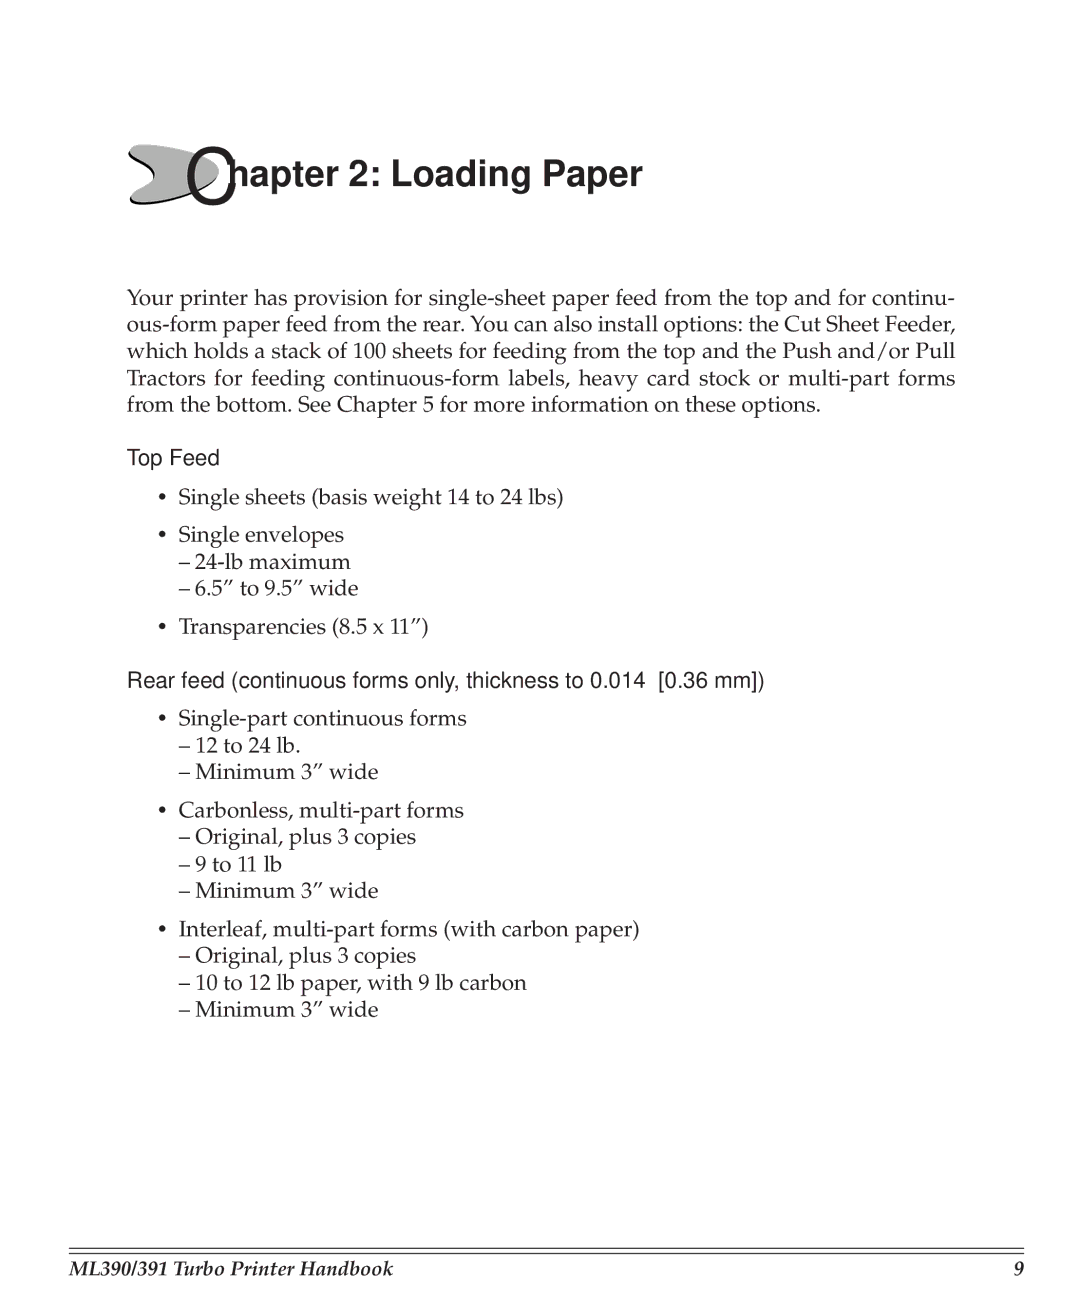 Turbo Chef Technologies 390/391 manual Loading Paper, Top Feed, Rear feed continuous forms only, thickness to 0.014 0.36 mm 